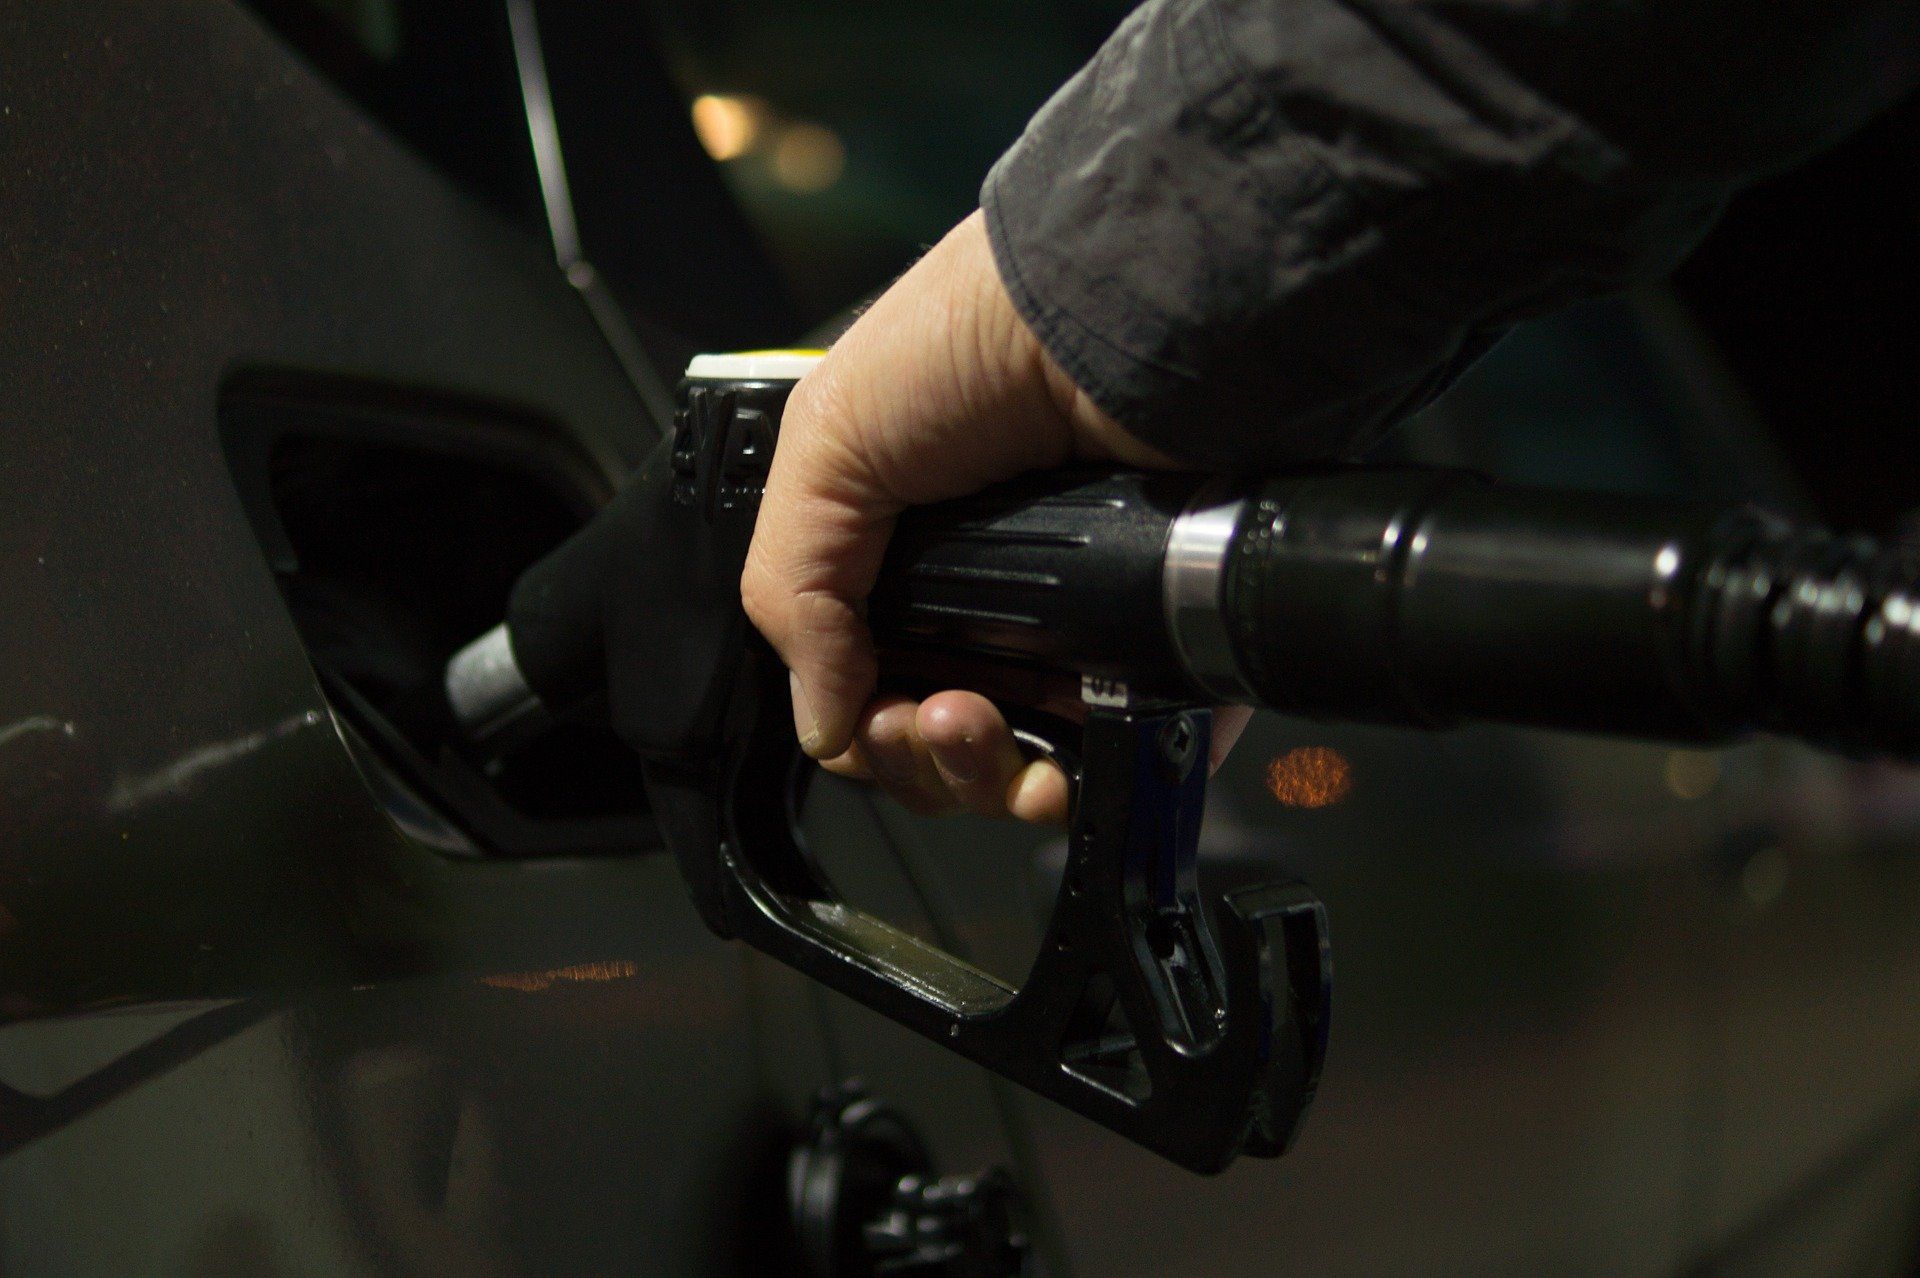 Fuel Price today: Petrol priced at Rs 95.41, diesel Rs 86.67 in Delhi on December 21